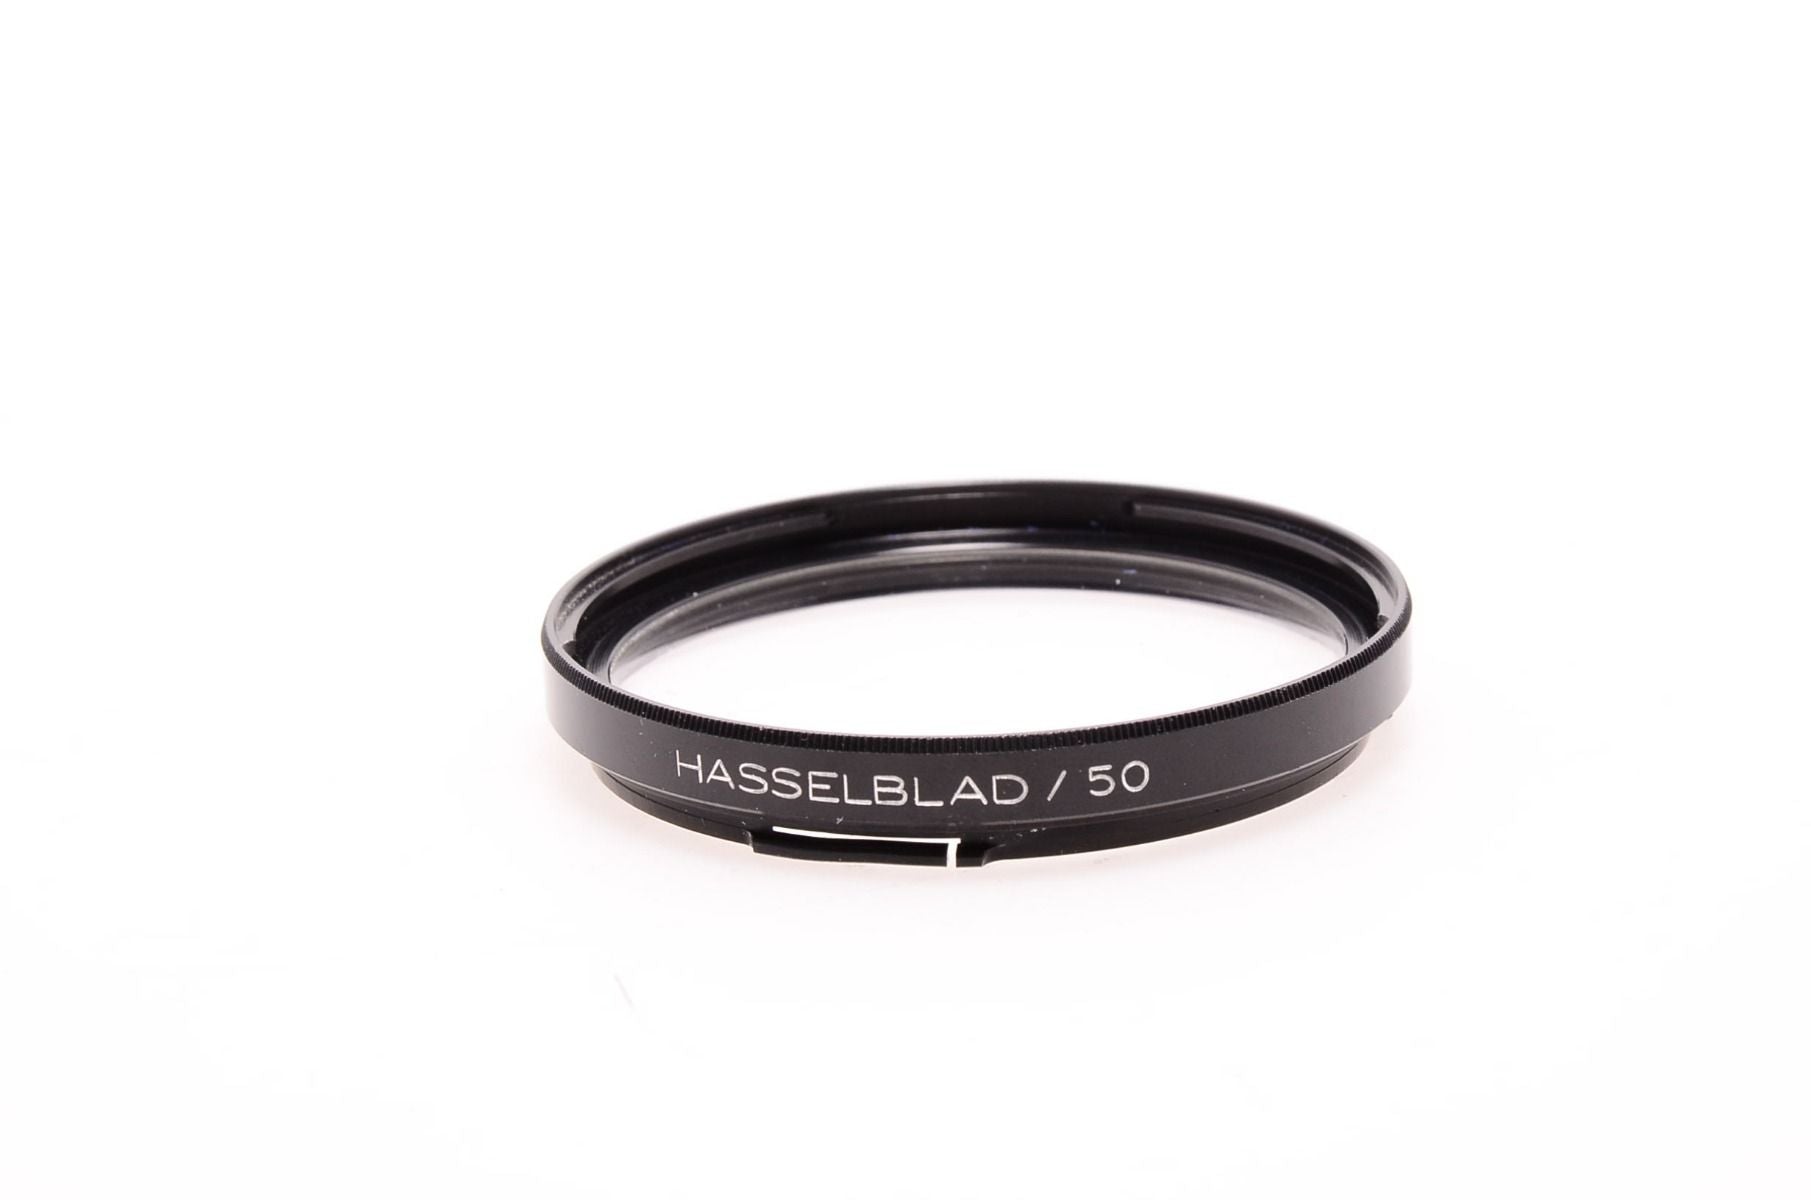 Product Image of Used Hasselblad / 50 series 1x Haze filter (SH35952)